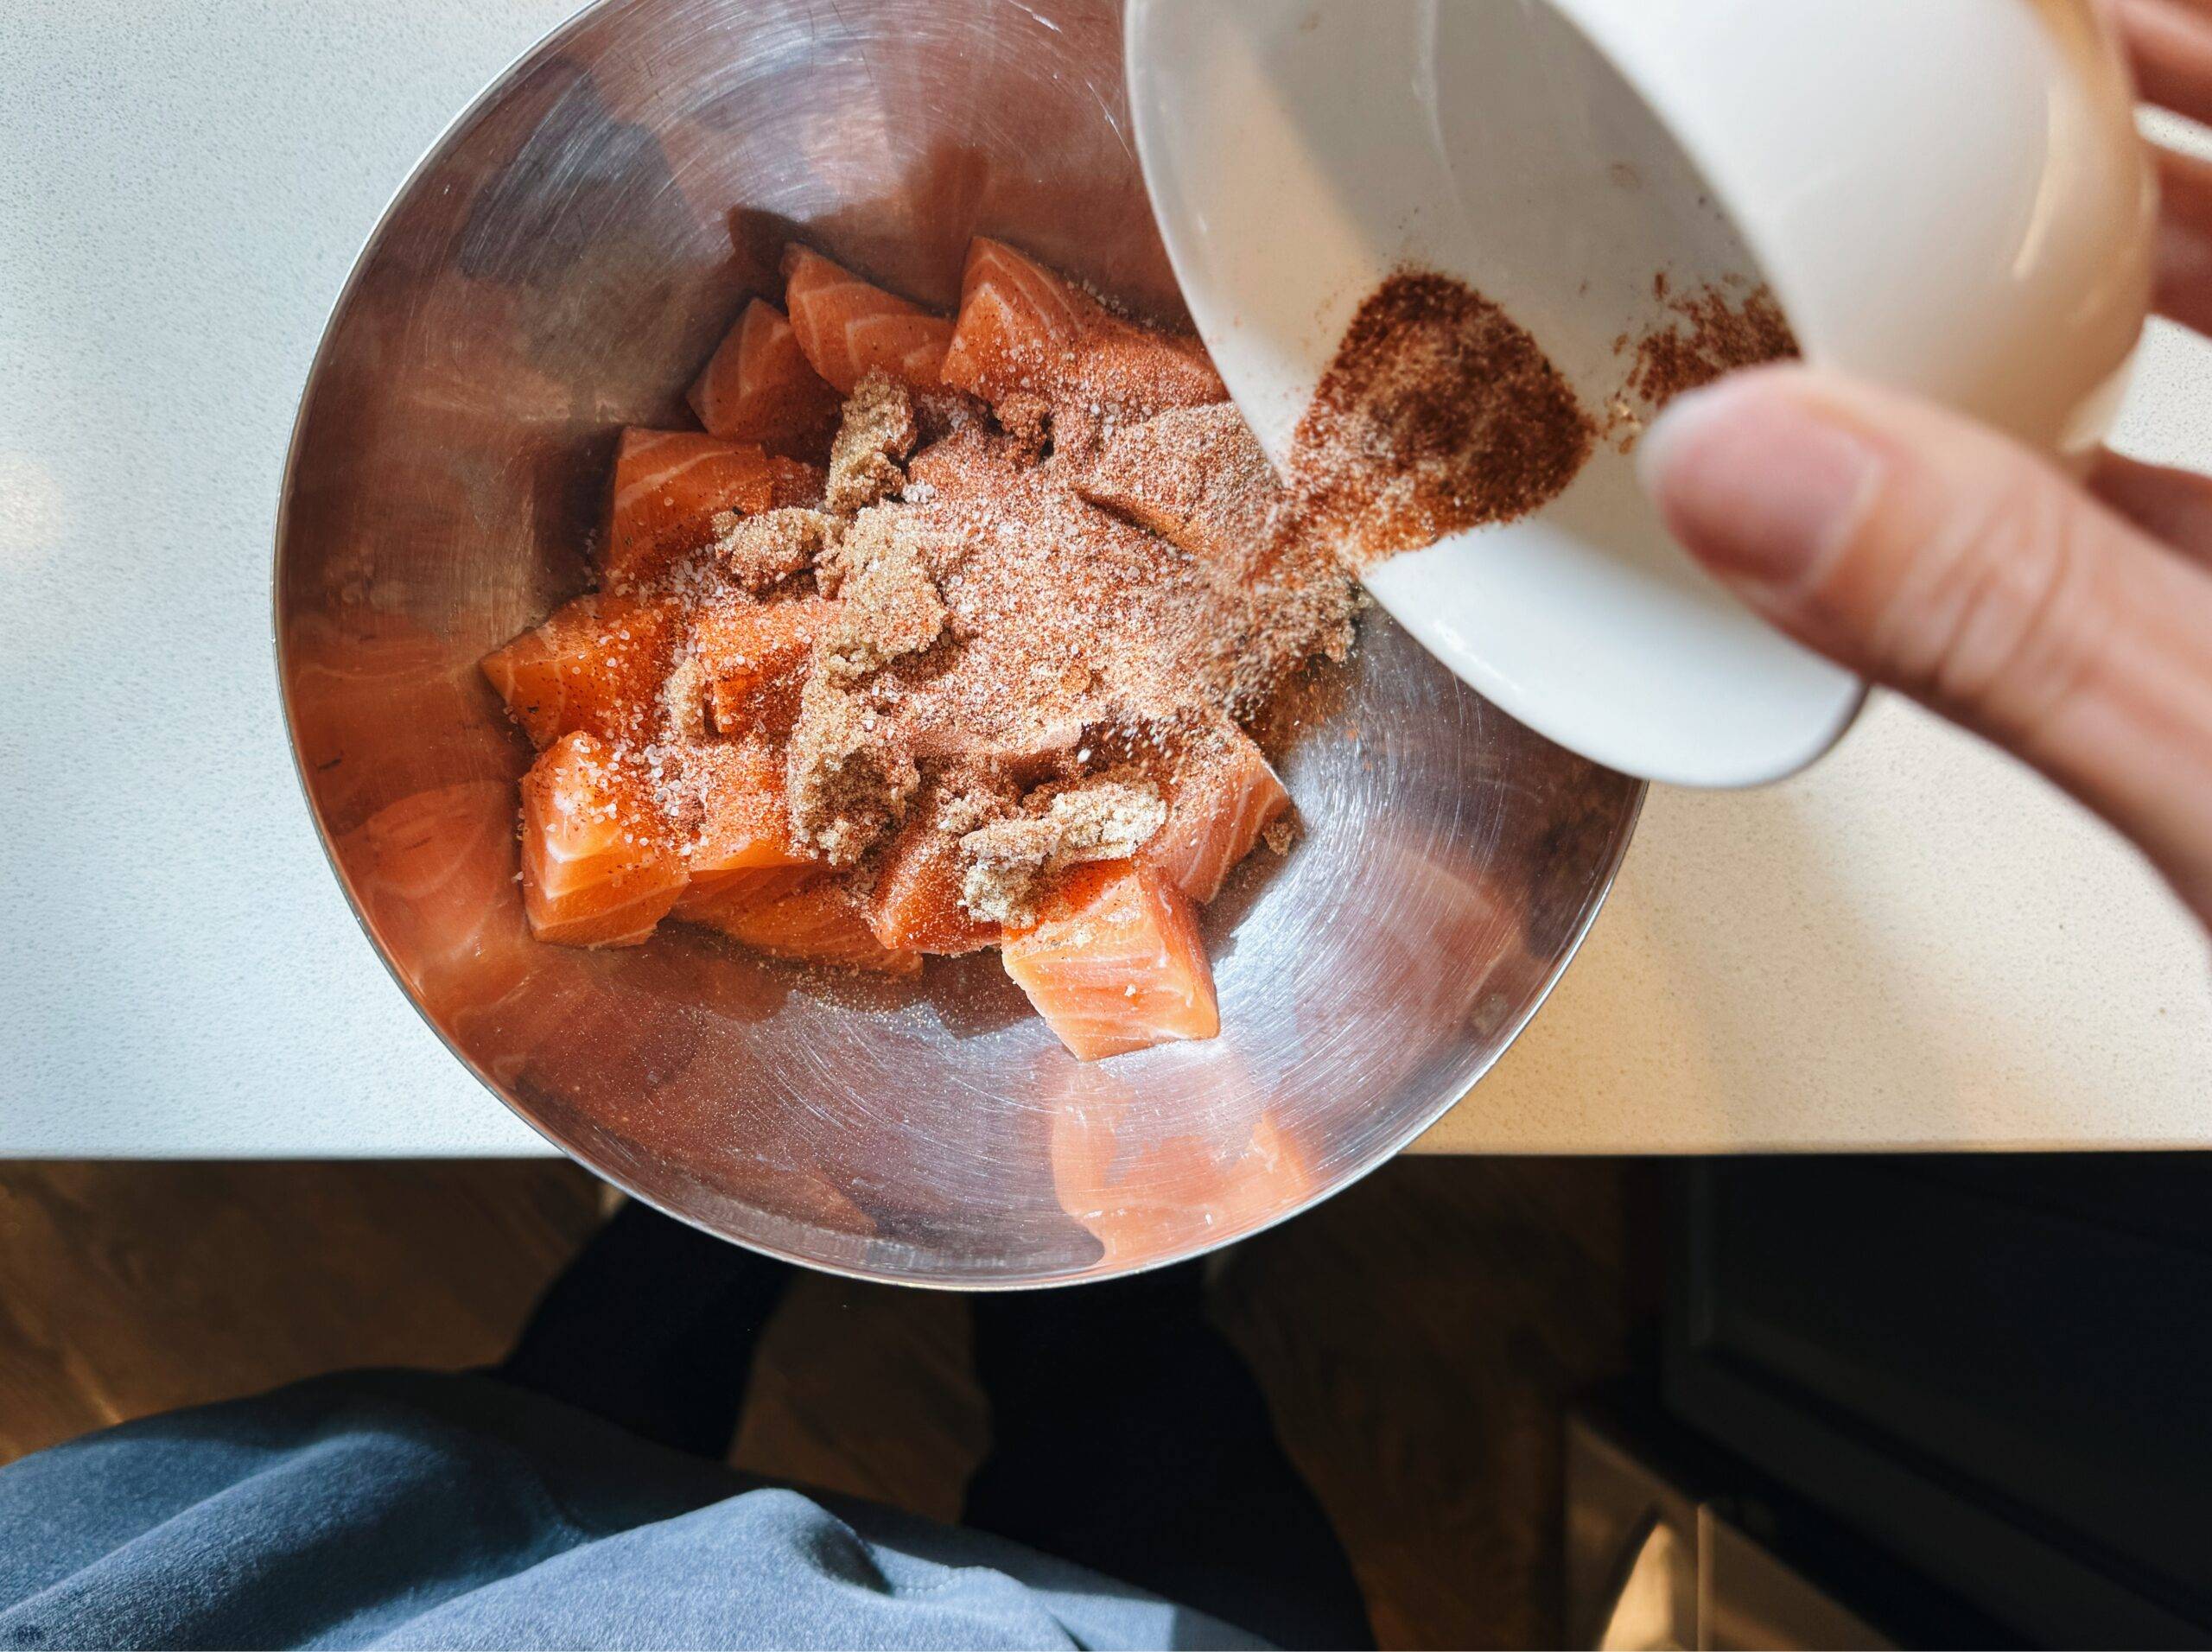 Sprinkling spices on cubed salmon in a bowl.